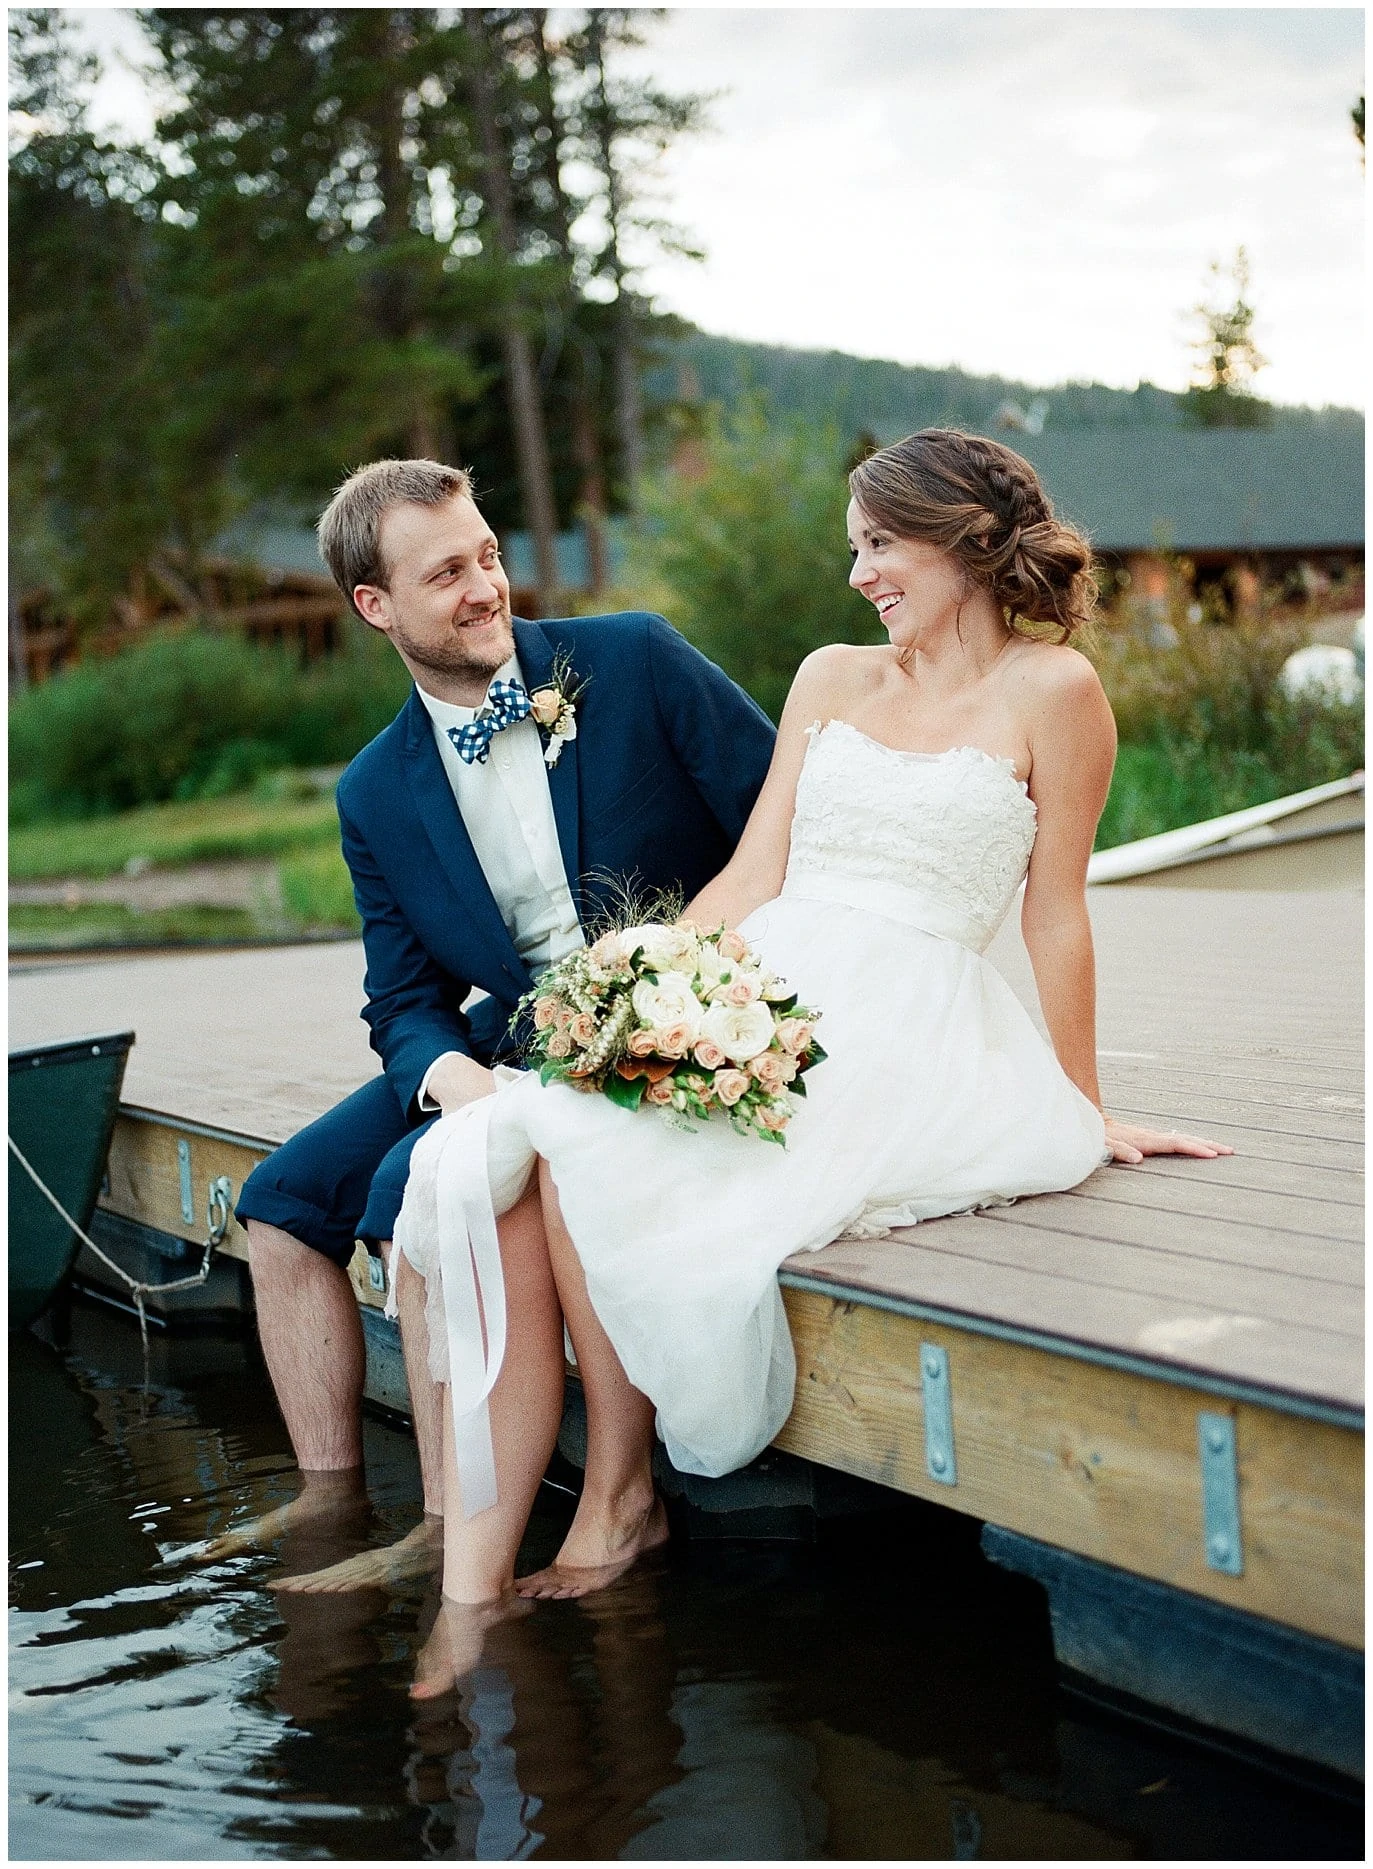 carefree colorado mountain lake wedding with bride and groom putting feet in lake at Piney River Ranch intimate wedding by Aspen wedding photographer Jennie Crate Photographer